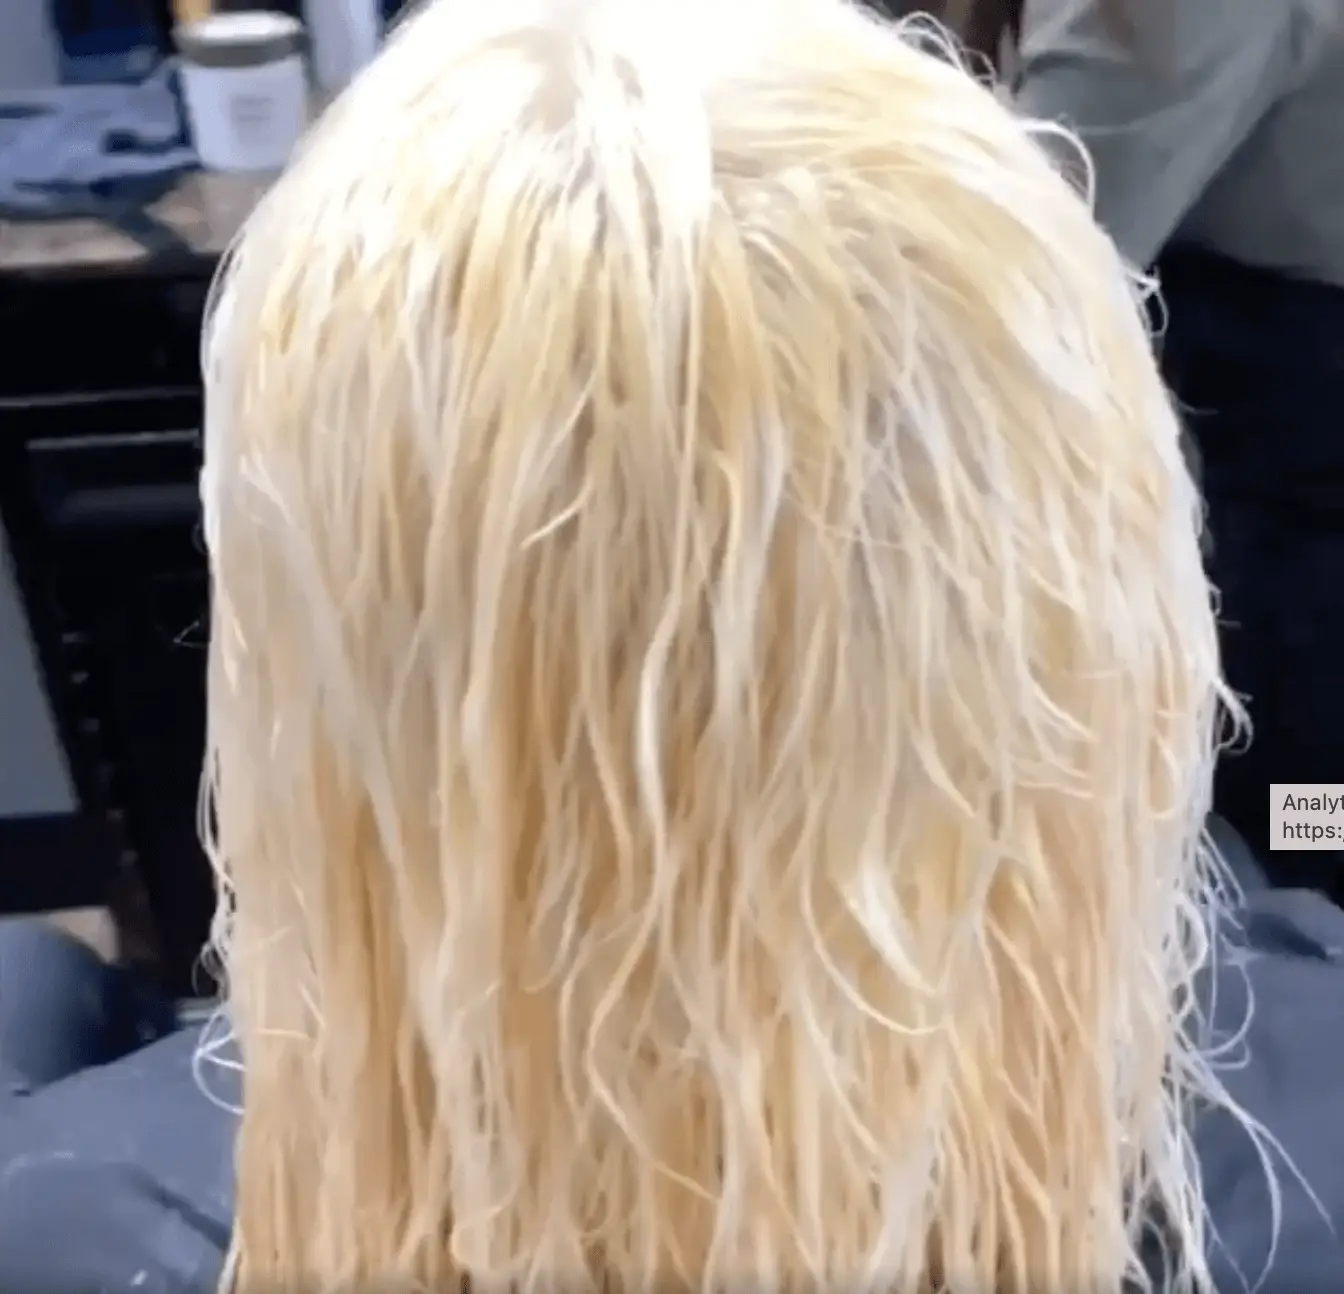 How to take hair from Orange to Platinum Blonde - Ugly Duckling